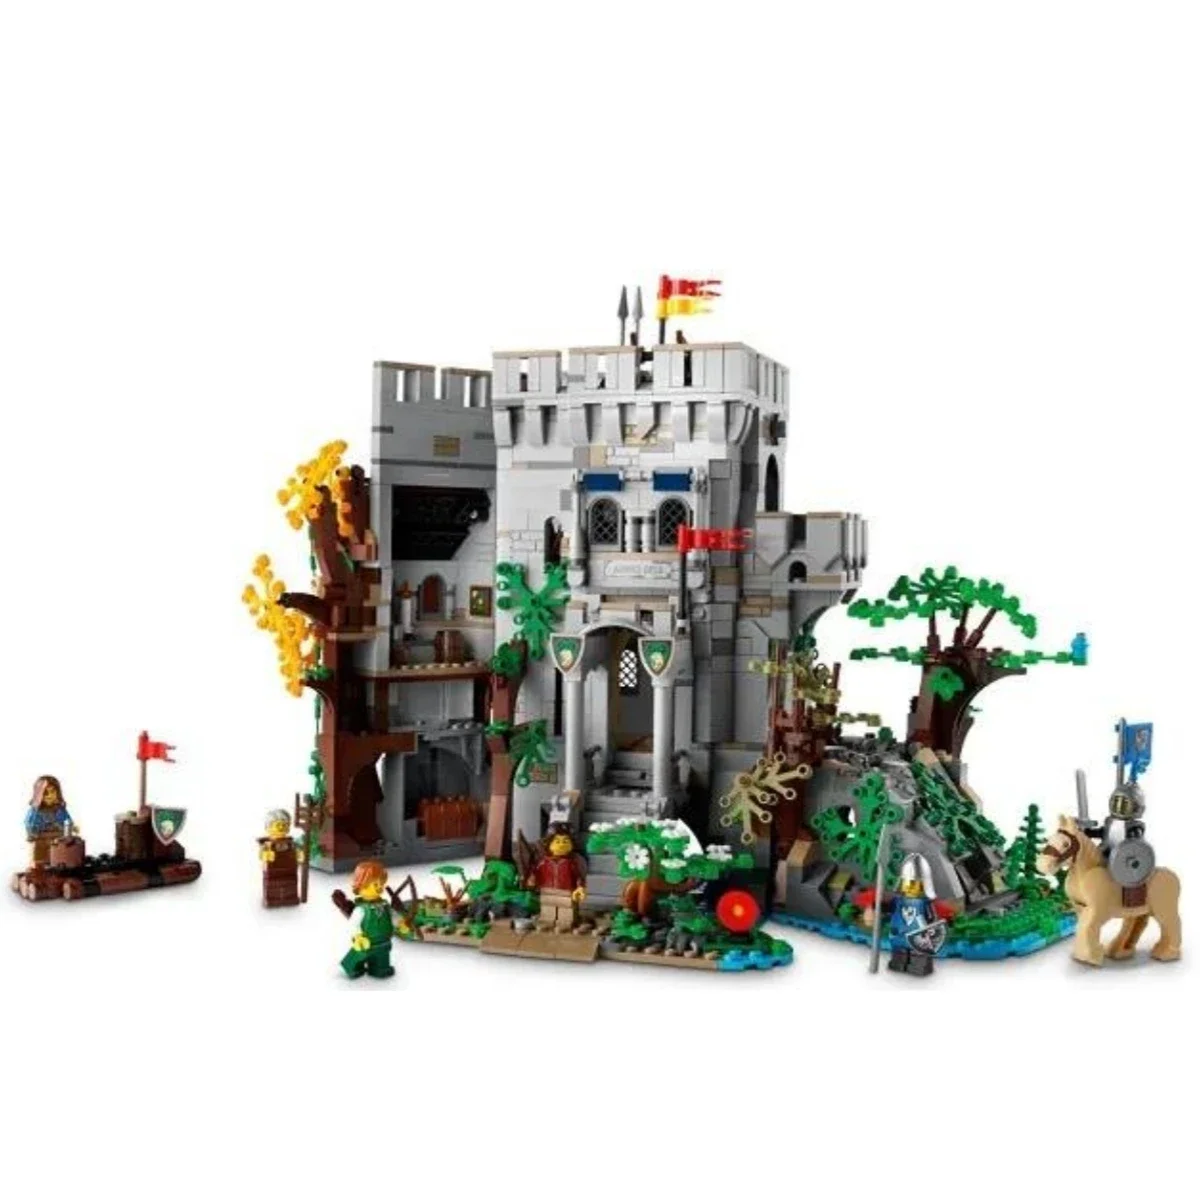 

NEW 1928PCS MOC 910001 European Medieval Castle In The Forest Building Blocks DIY Creative Ideas Bricks Toy Kid Christmas Gifts